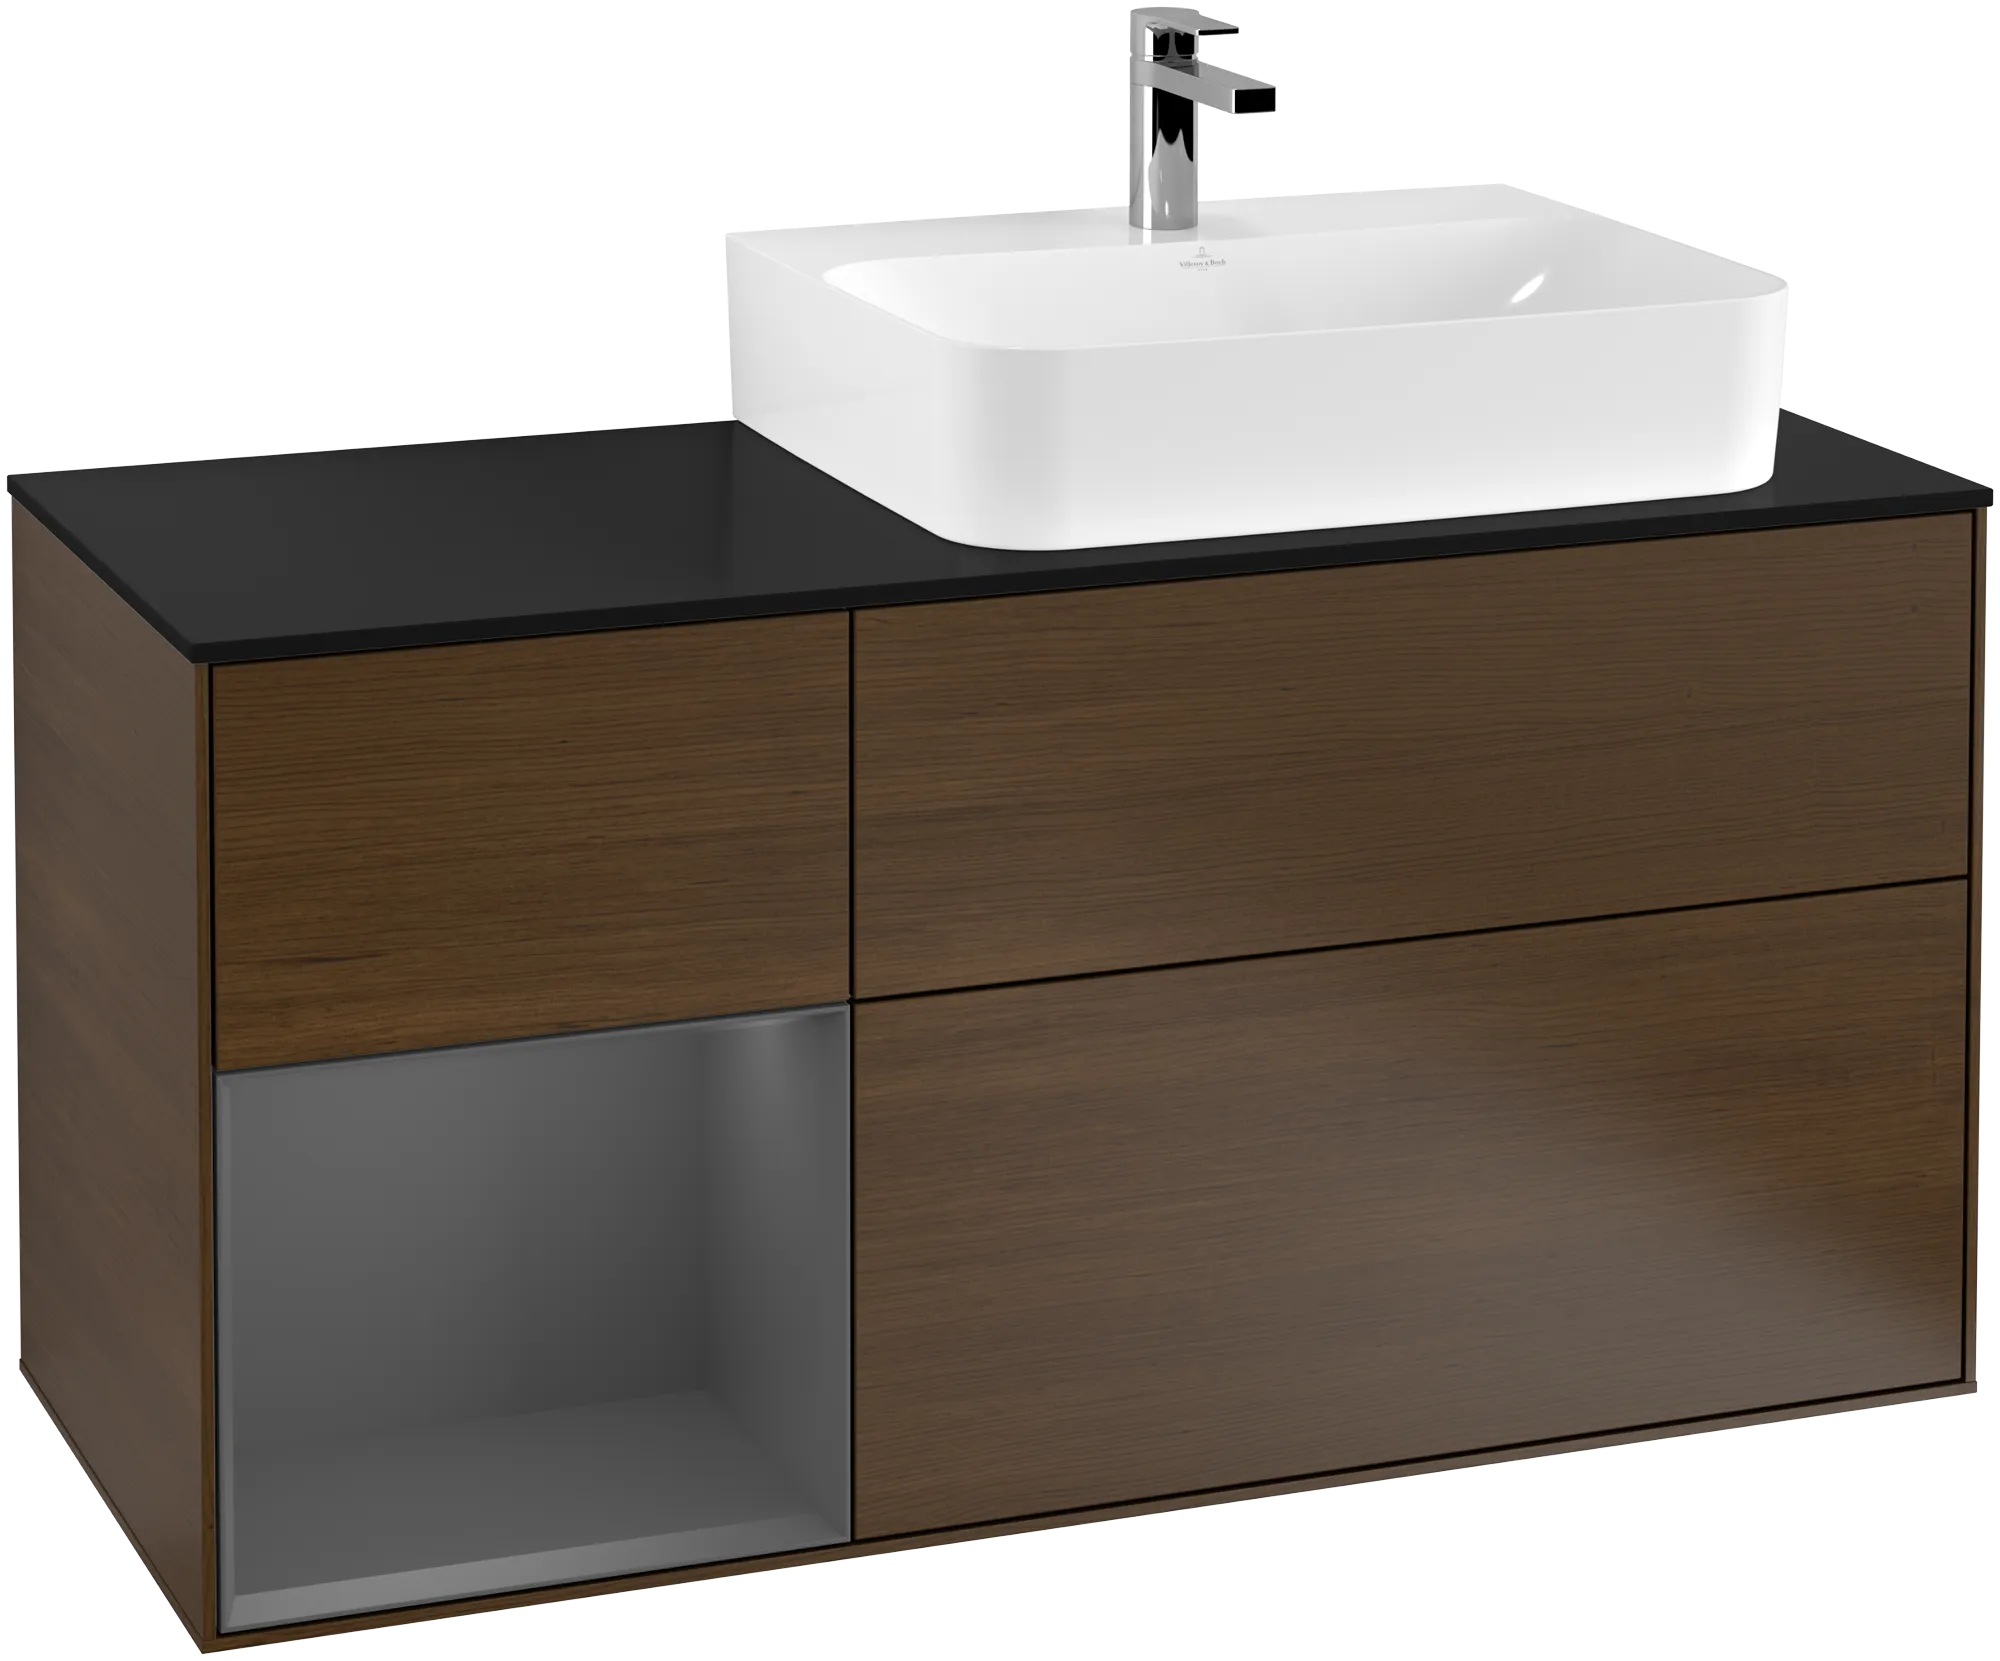 Picture of VILLEROY BOCH Finion Vanity unit, with lighting, 3 pull-out compartments, 1200 x 603 x 501 mm, Walnut Veneer / Anthracite Matt Lacquer / Glass Black Matt #G142GKGN